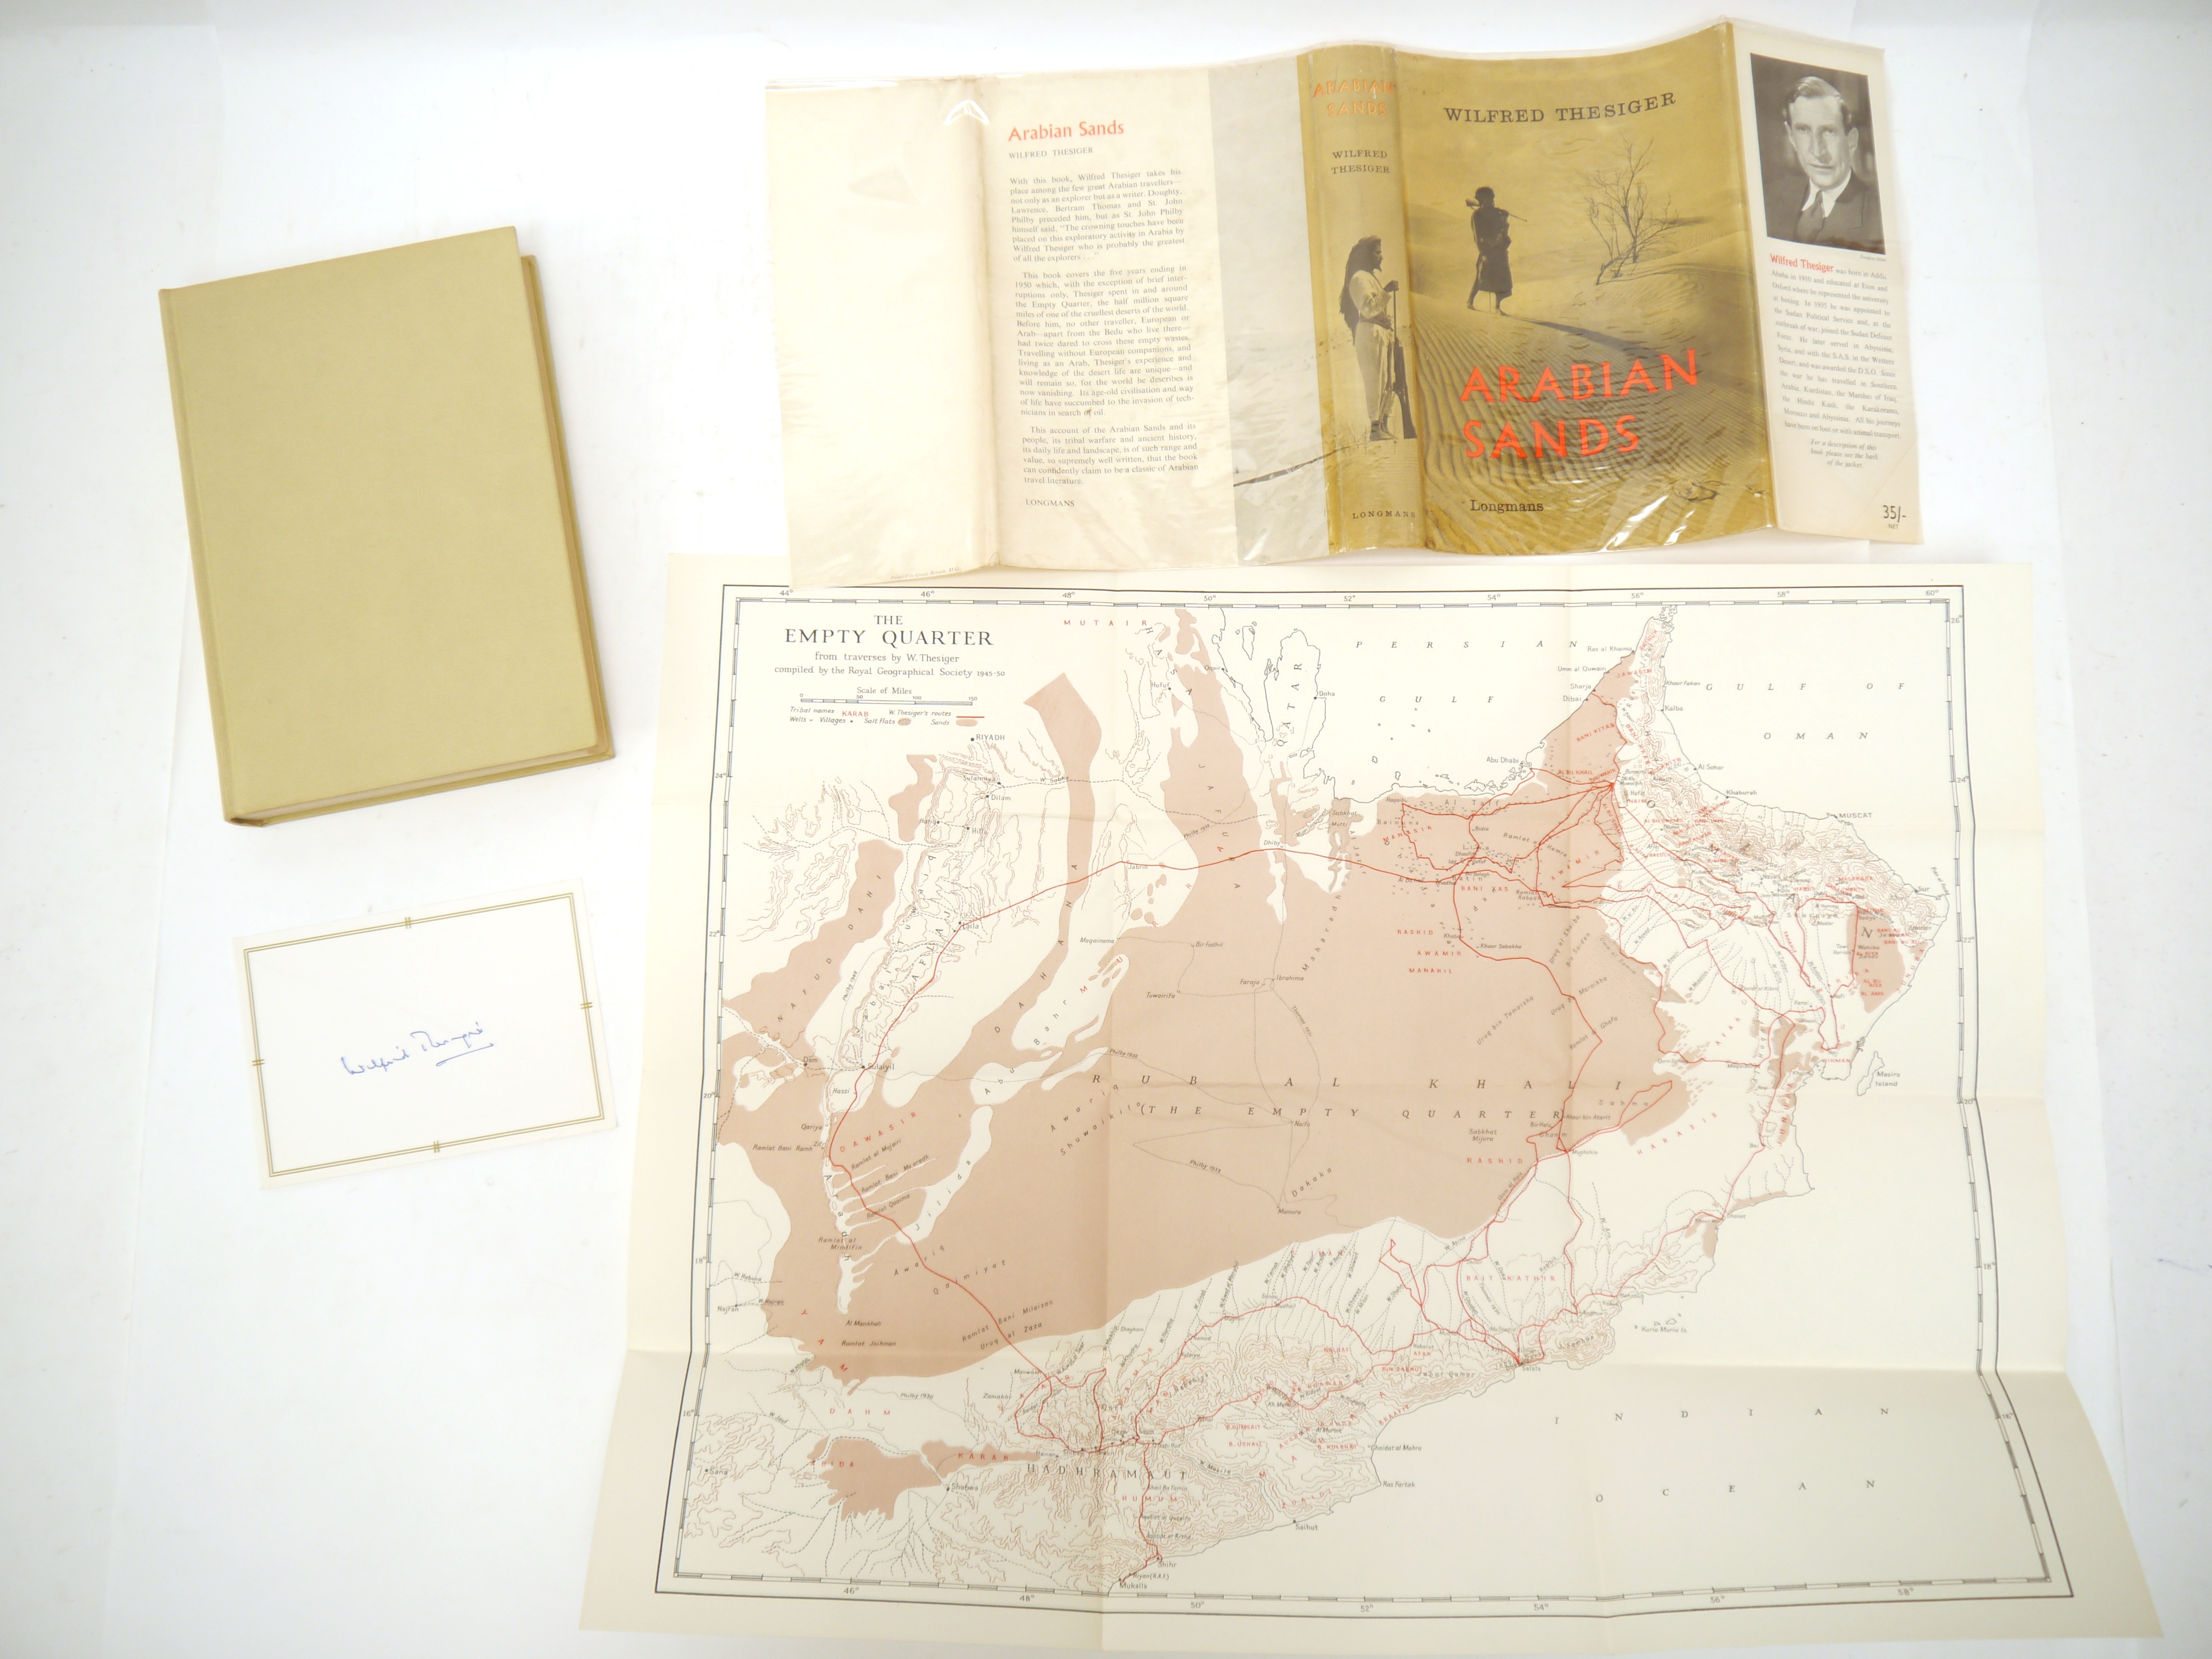 Wilfred Thesiger: 'Arabian Sands', London, Longmans, 1959, 1st edition, card signed by Thesiger in - Image 5 of 7